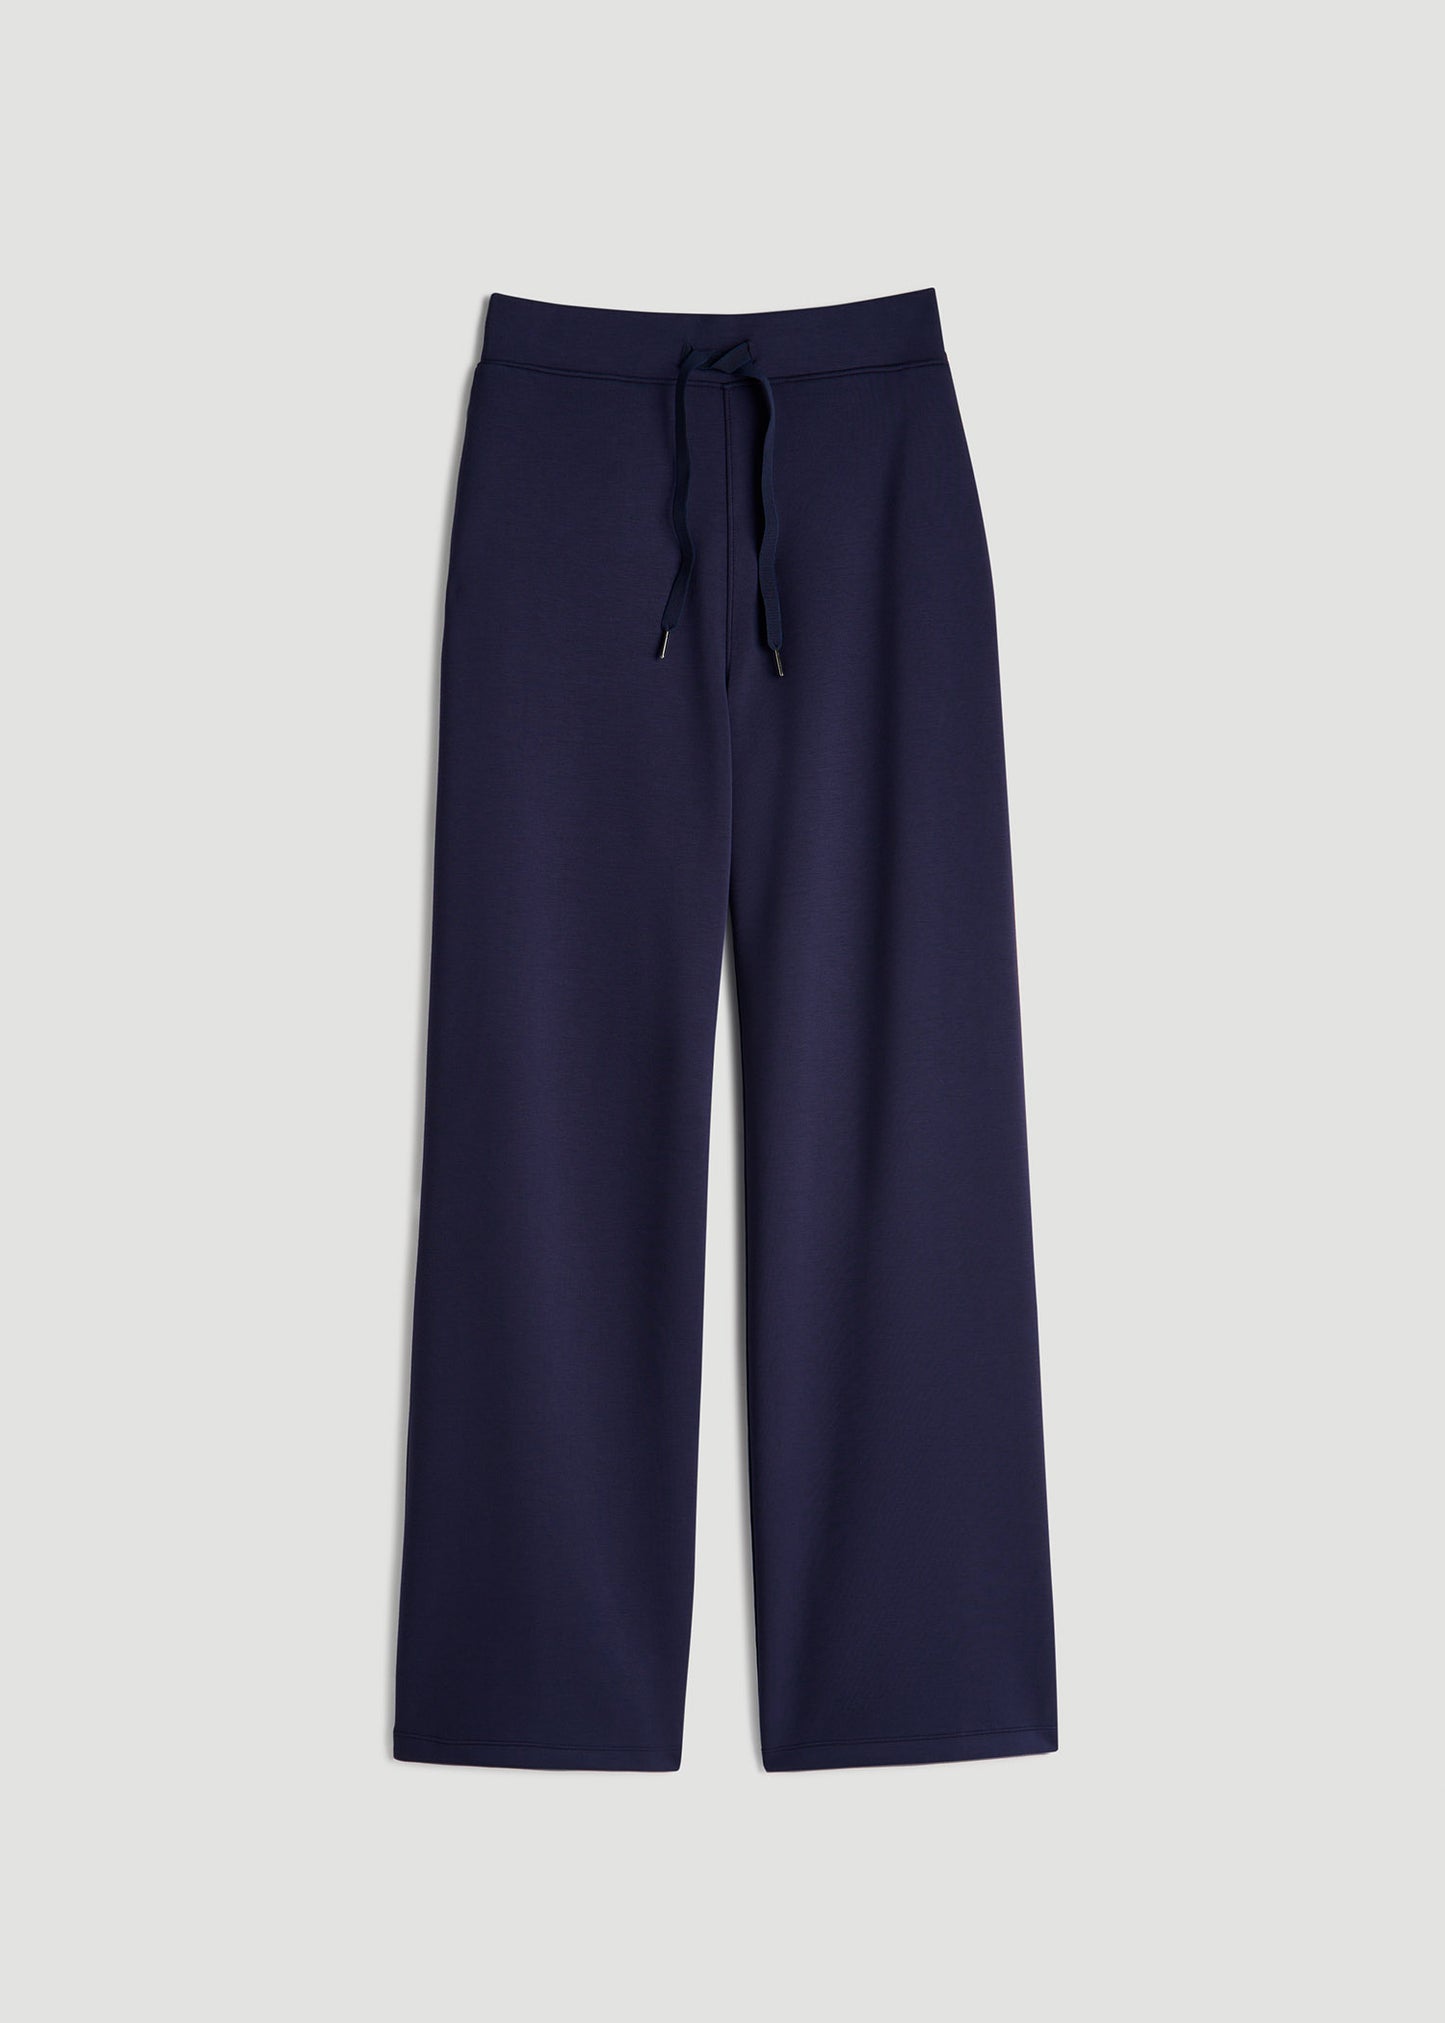 Pull-On Tie Waist Wide Leg Pants for Tall Women in Navy